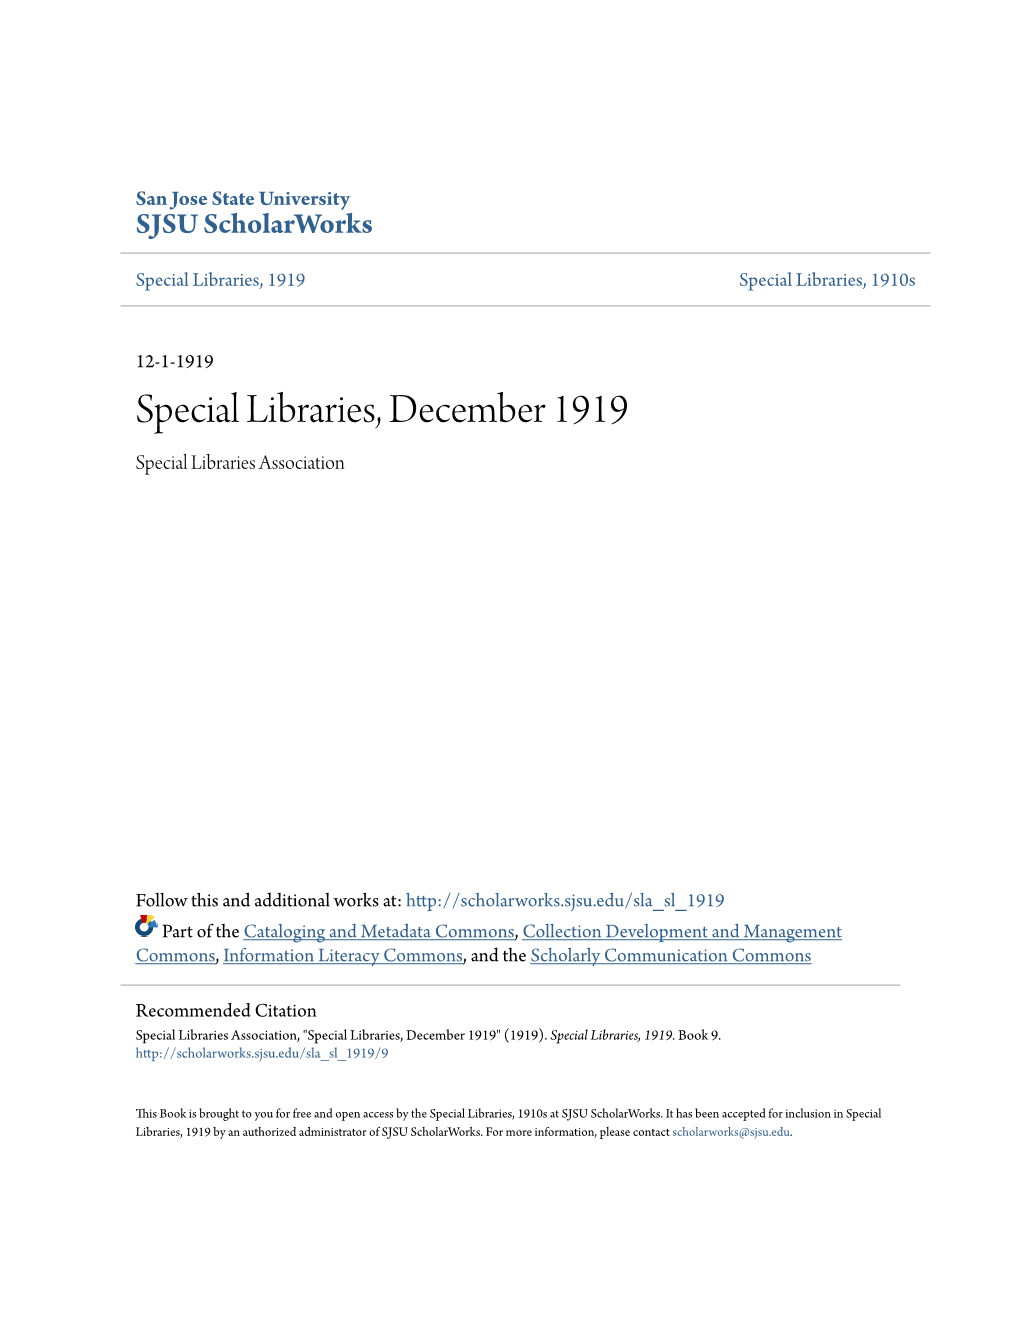 Special Libraries, December 1919 Special Libraries Association